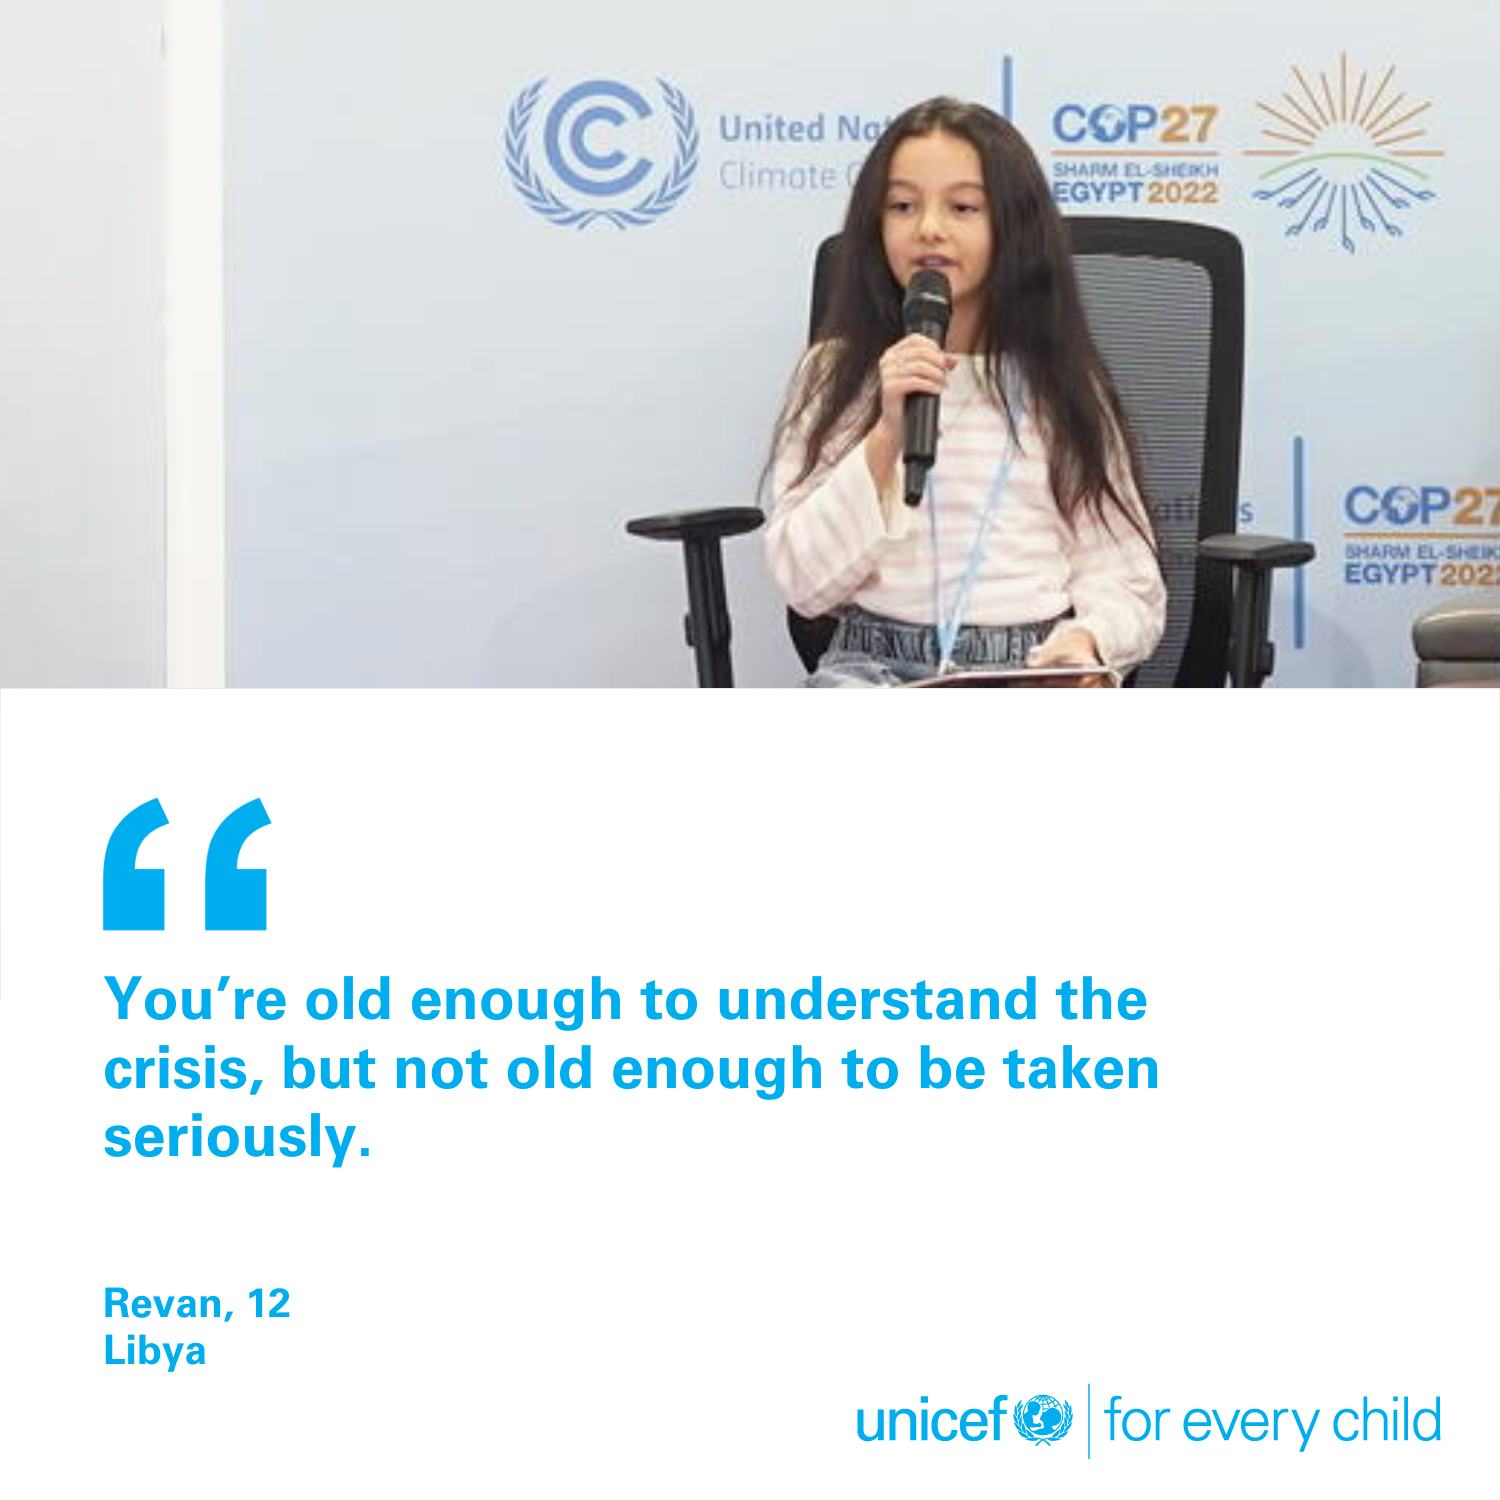 Peut être une image de 1 personne et texte qui dit ’C United Ng Climote COP27 SHARM -SHERCH EGYPT 2022 COP27 EGYPT202 EGYPT 202 " You're old enough to understand the crisis, but not old enough to be taken seriously. Revan, 12 Libya unicef for every child’